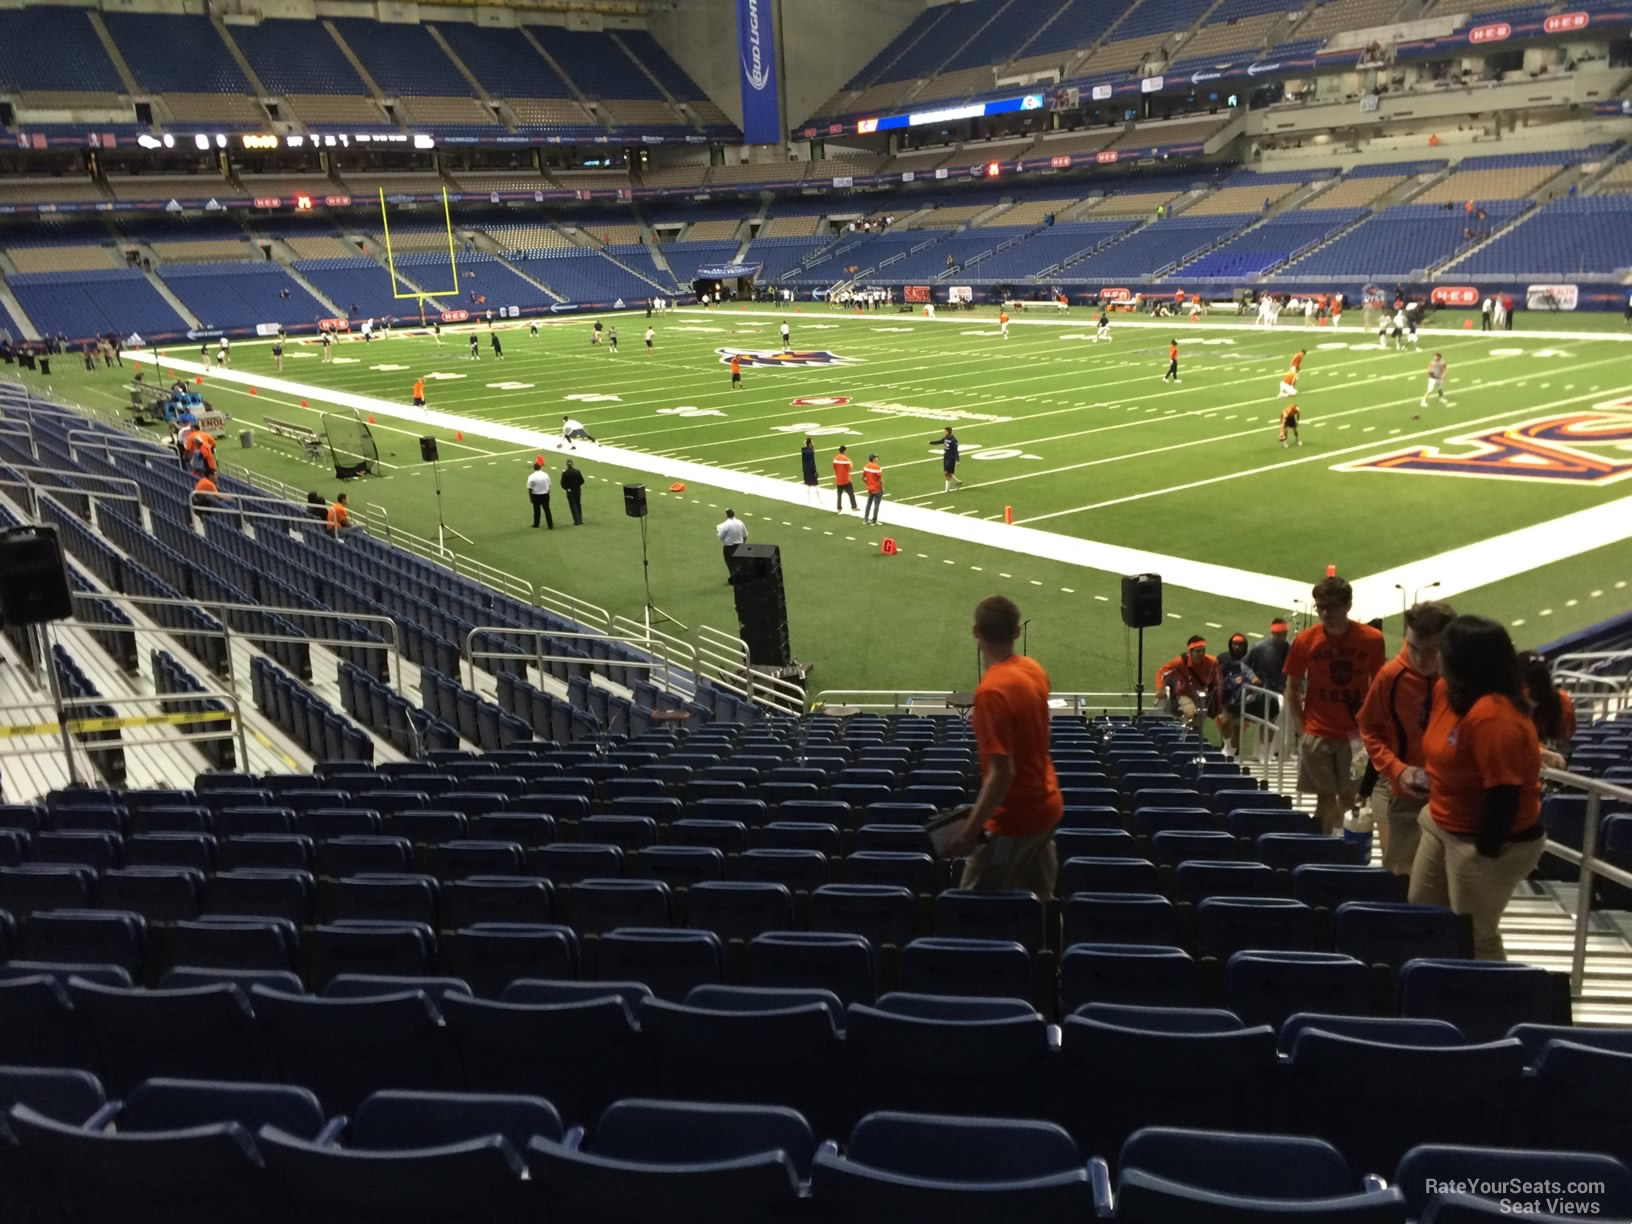 section 128, row 18 seat view  for football - alamodome